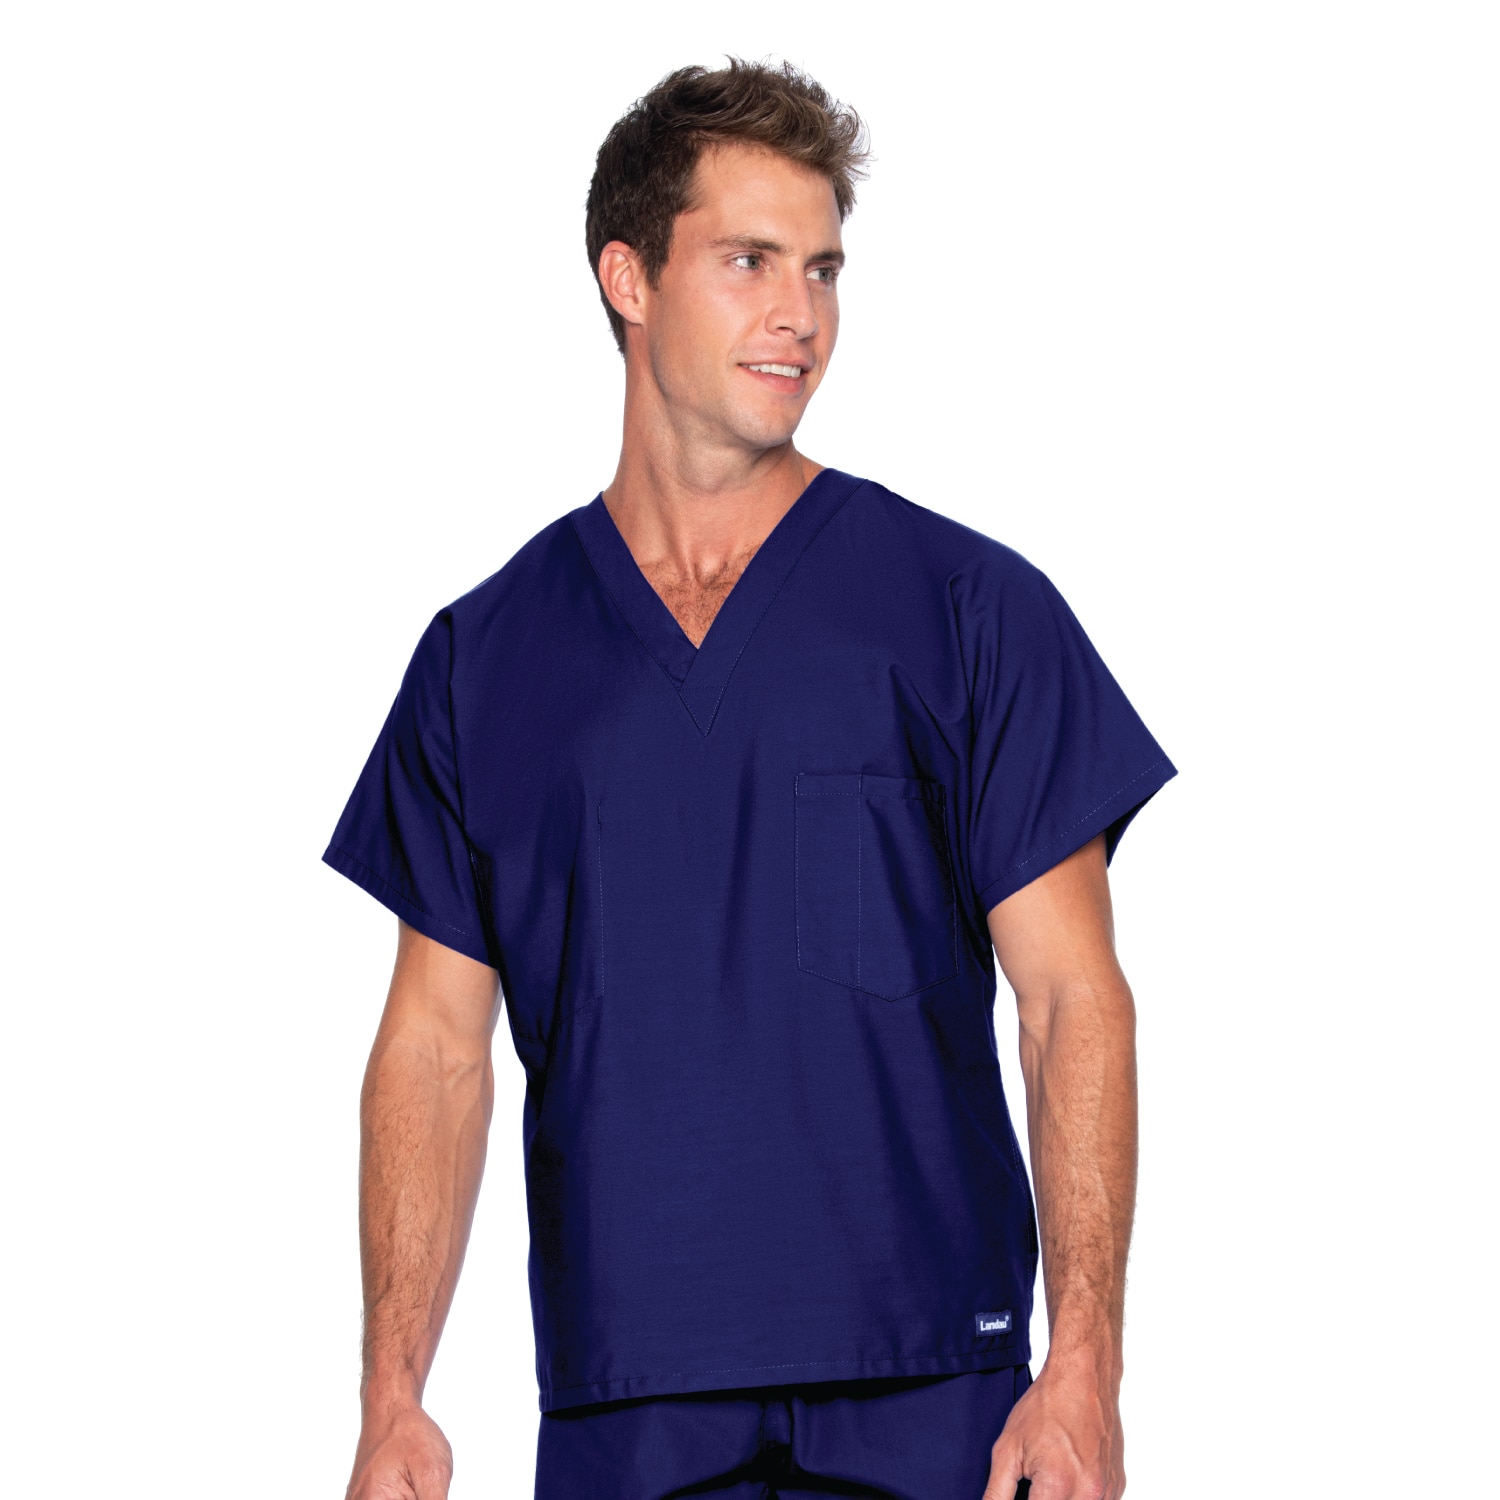 Reversible V-Neck Classic Fit Solid Scrub Top